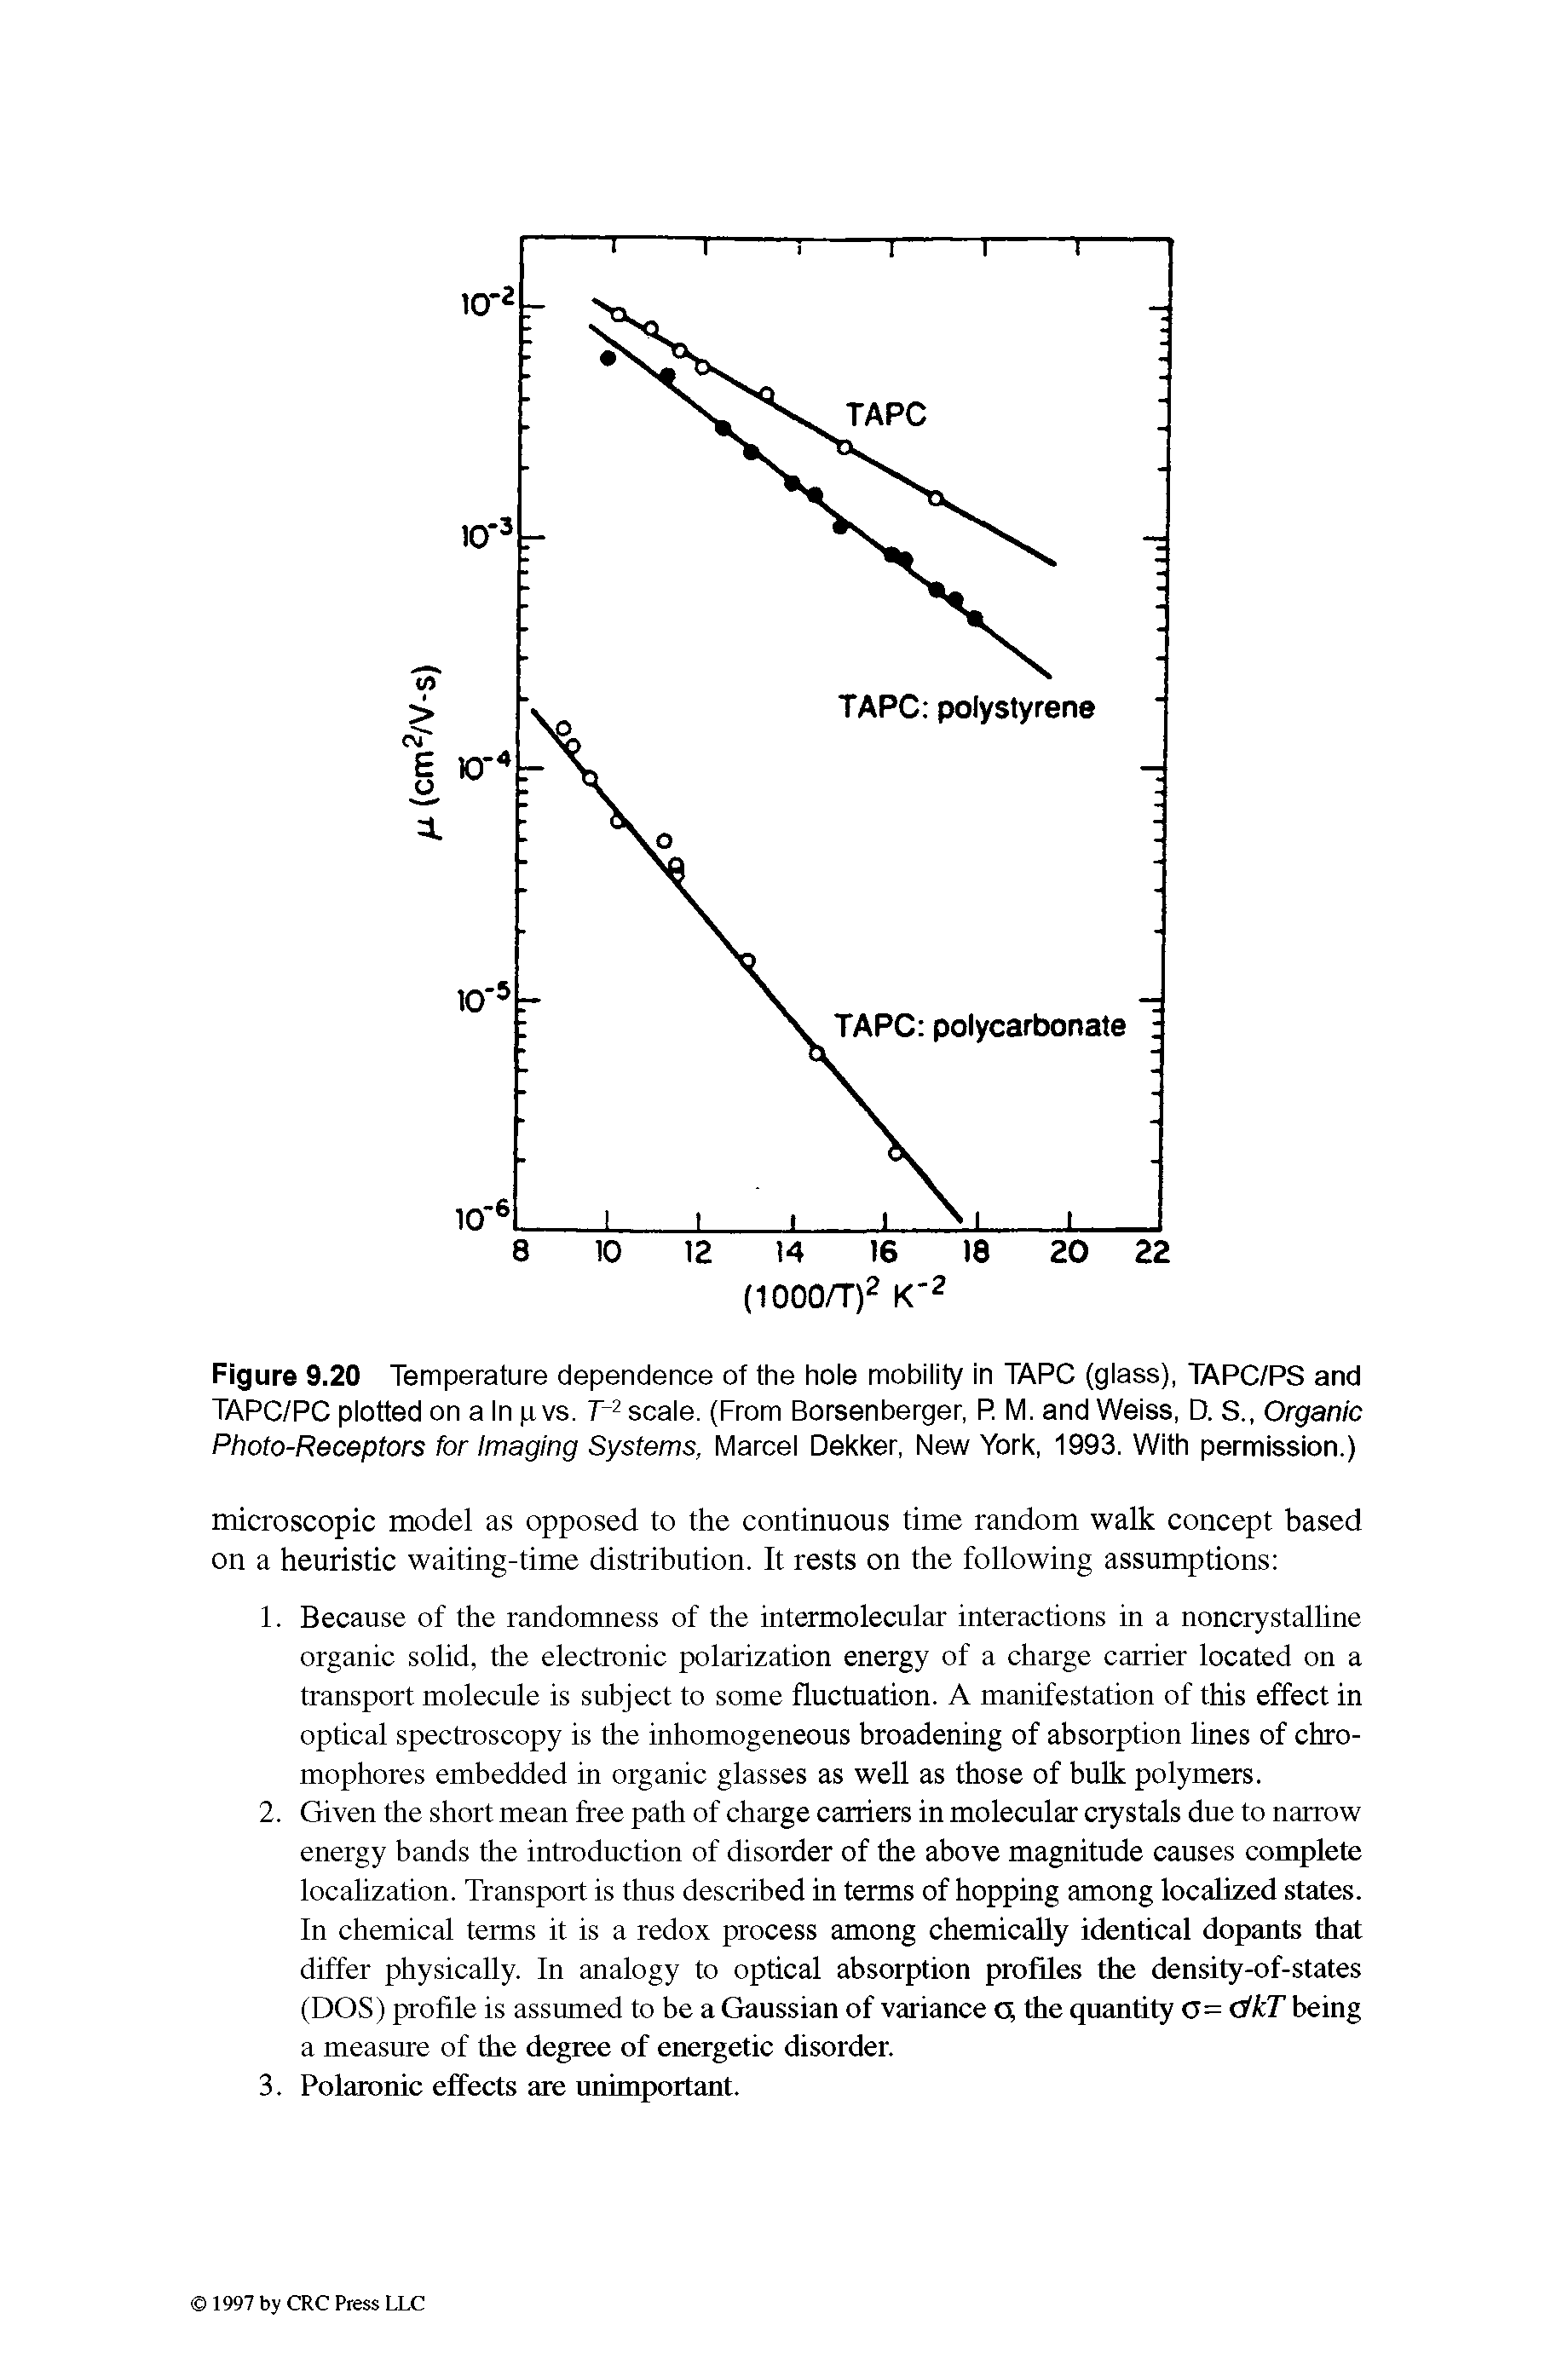 Figure 9.20 Temperature dependence of the hole mobility in TAPC (glass), TAPC/PS and TAPC/PC plotted on a In p vs. T- scale. (From Borsenberger, P. M. and Weiss, D. S., Organic Photo-Receptors for Imaging Systems, Marcel Dekker, New York, 1993. With permission.)...